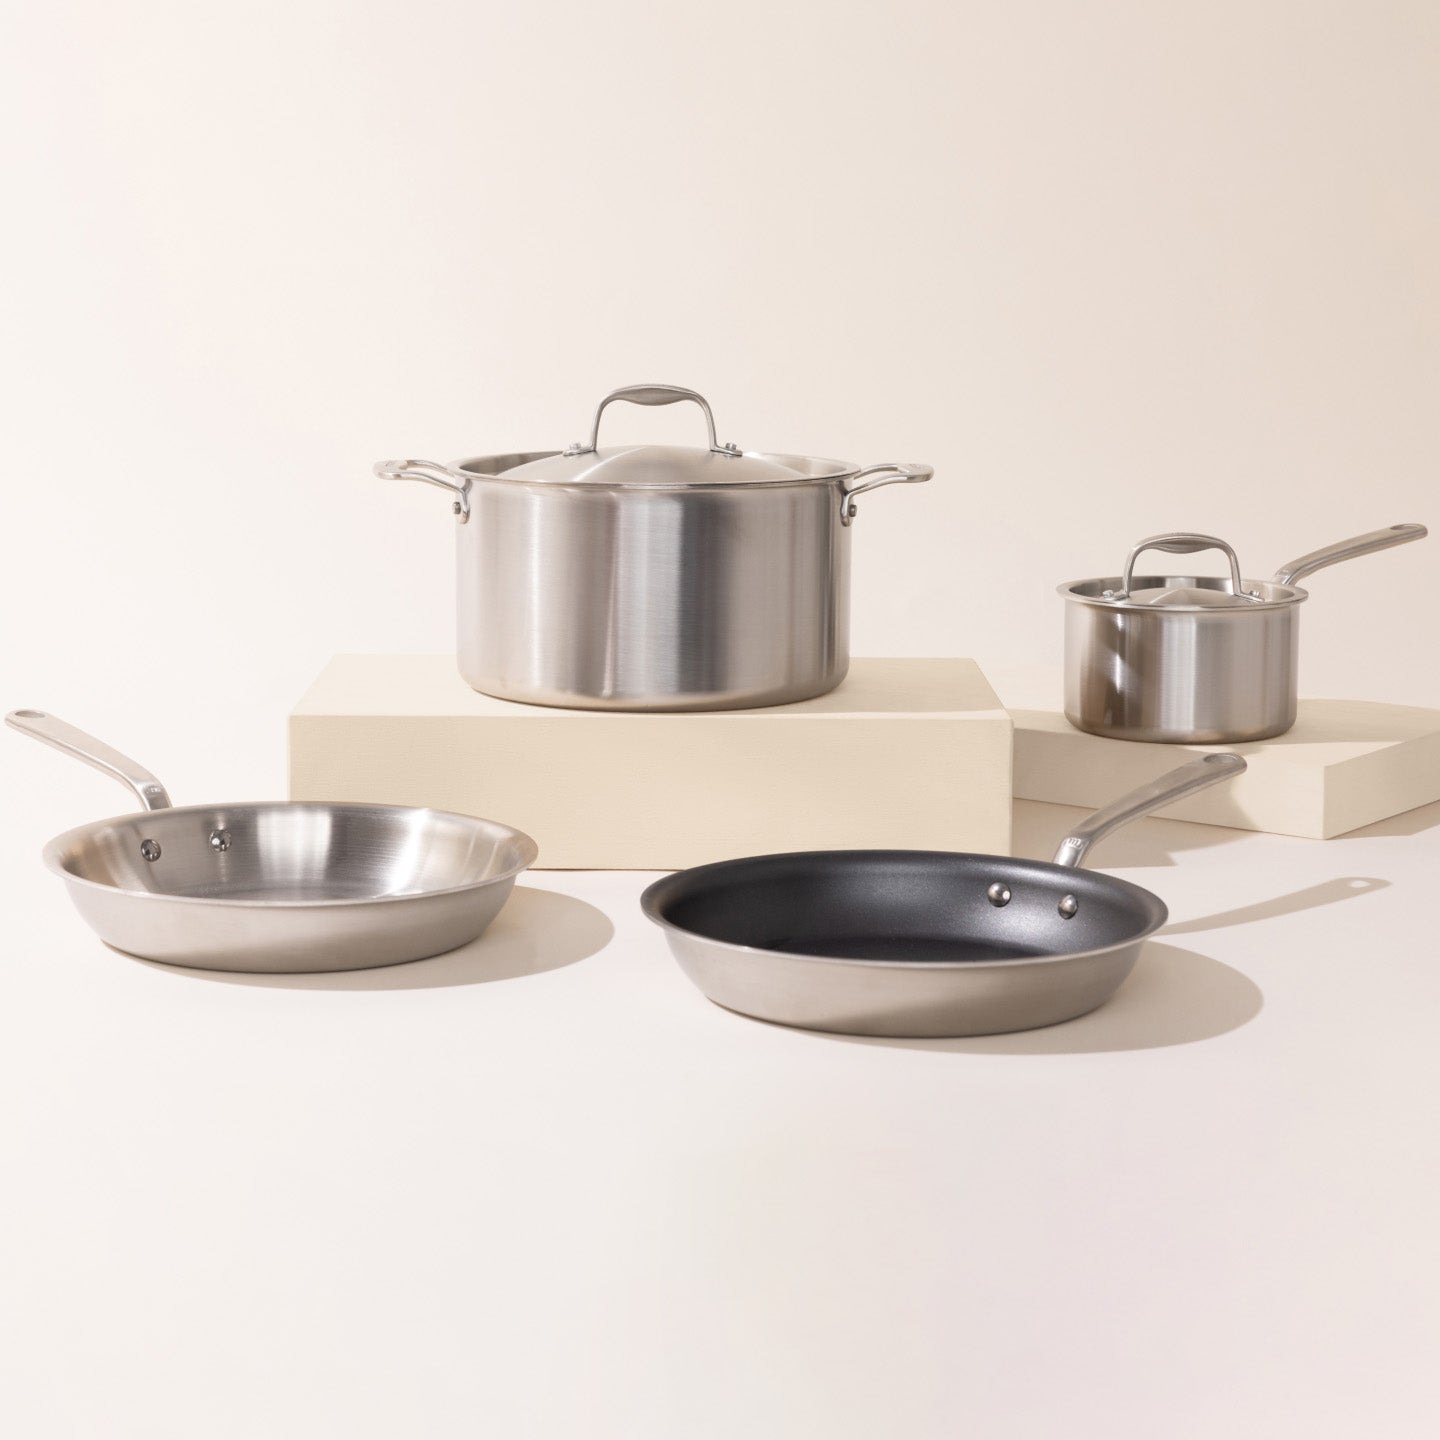 A.M.C. - pots - COOKWARE of 12 - Steel (stainless) - Catawiki